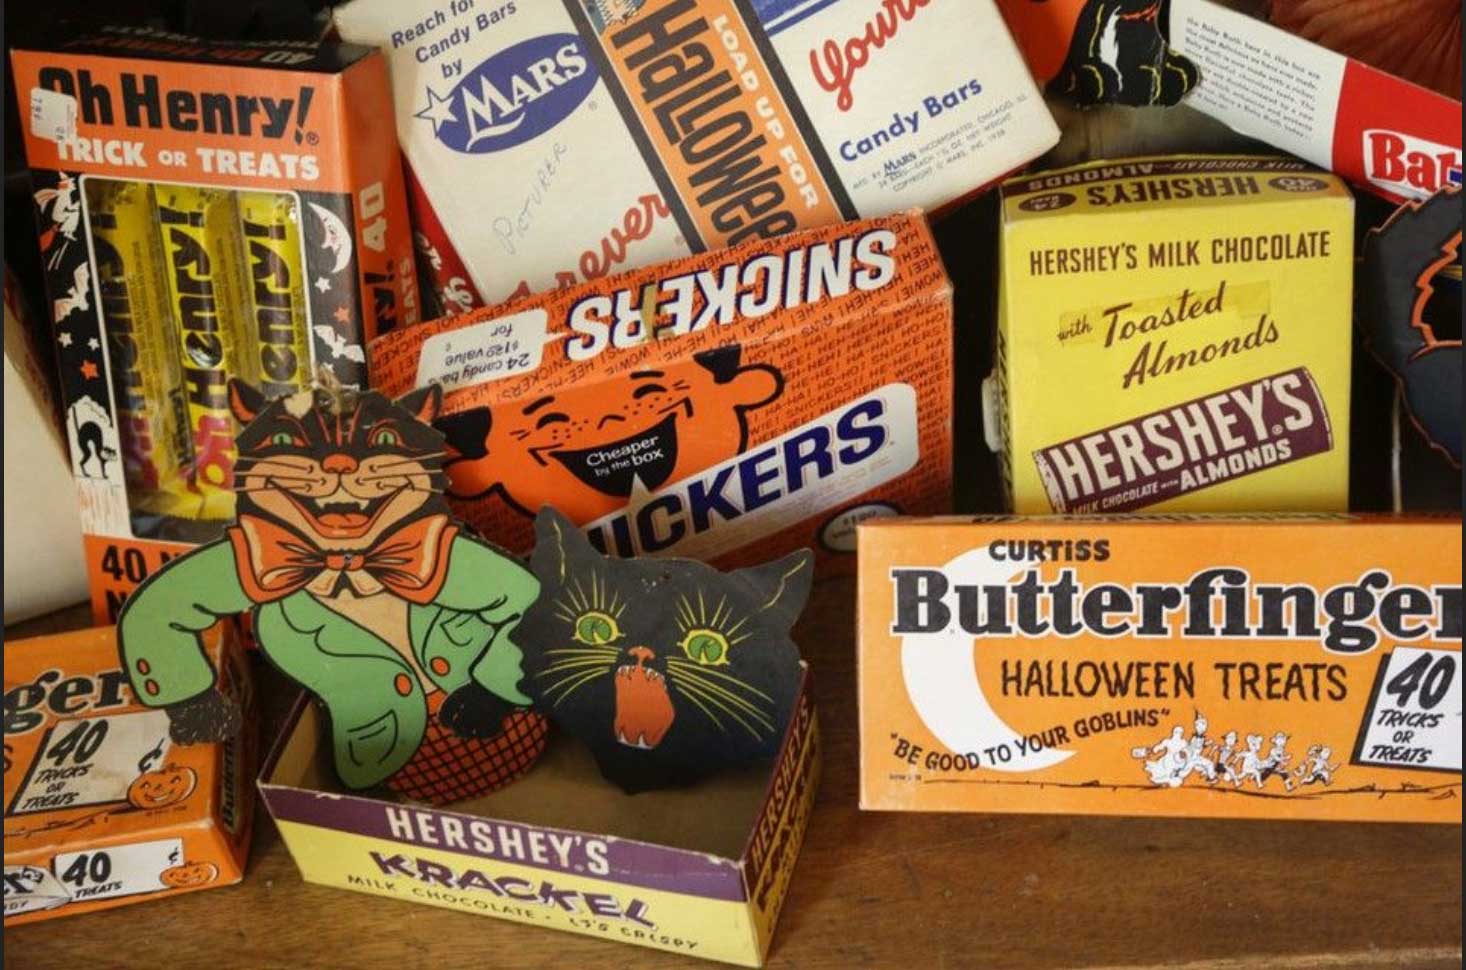 These Halloween candies still fill us with terror, but some still view them as treats